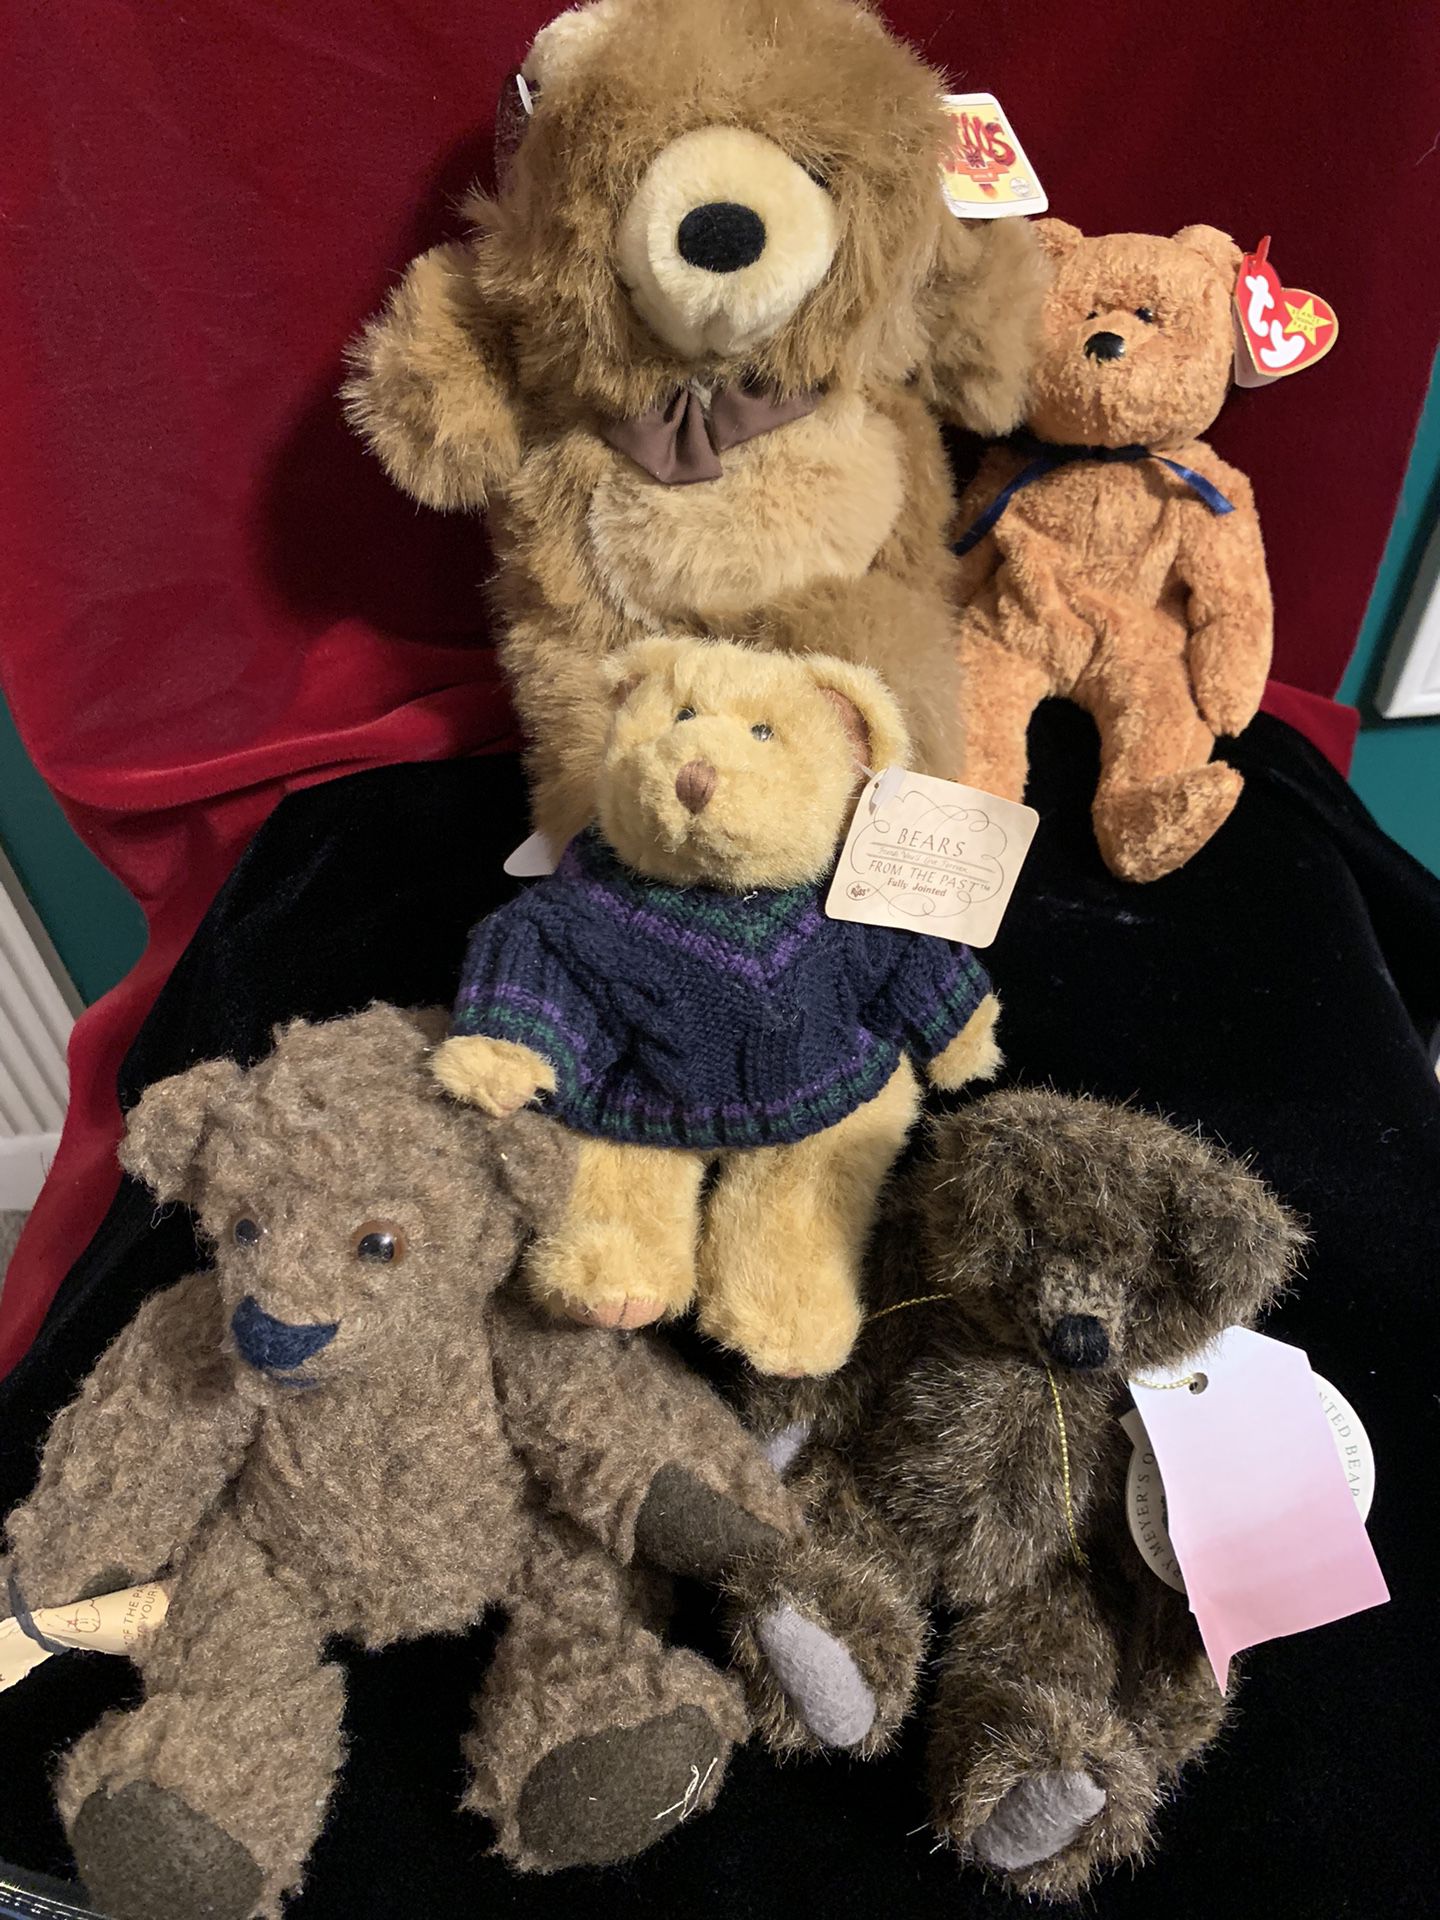 Five Collectible Teddy Bears 🧸